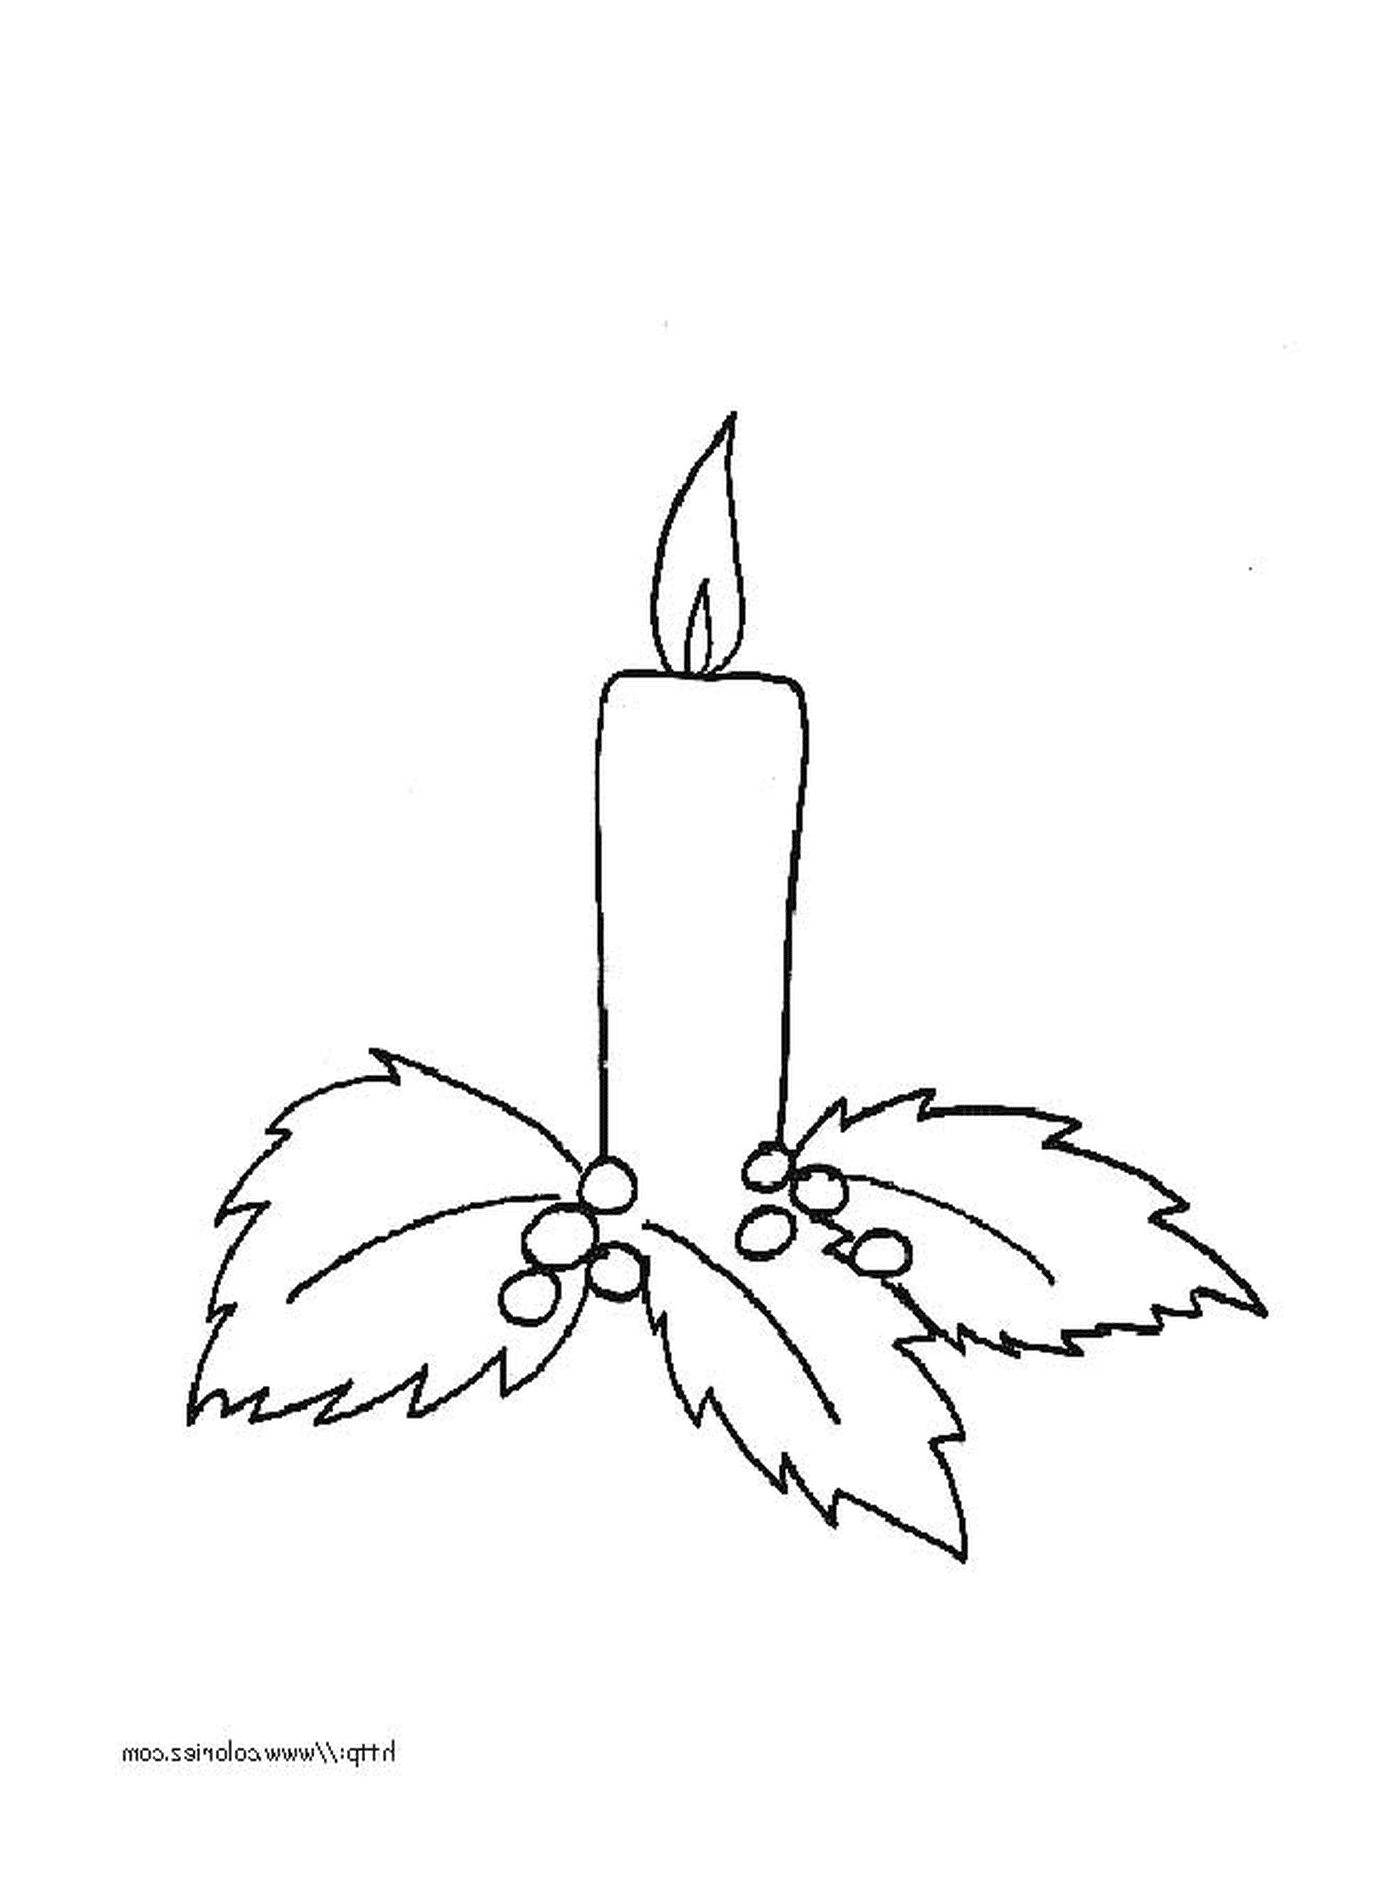  A candle lit surrounded by leaves 